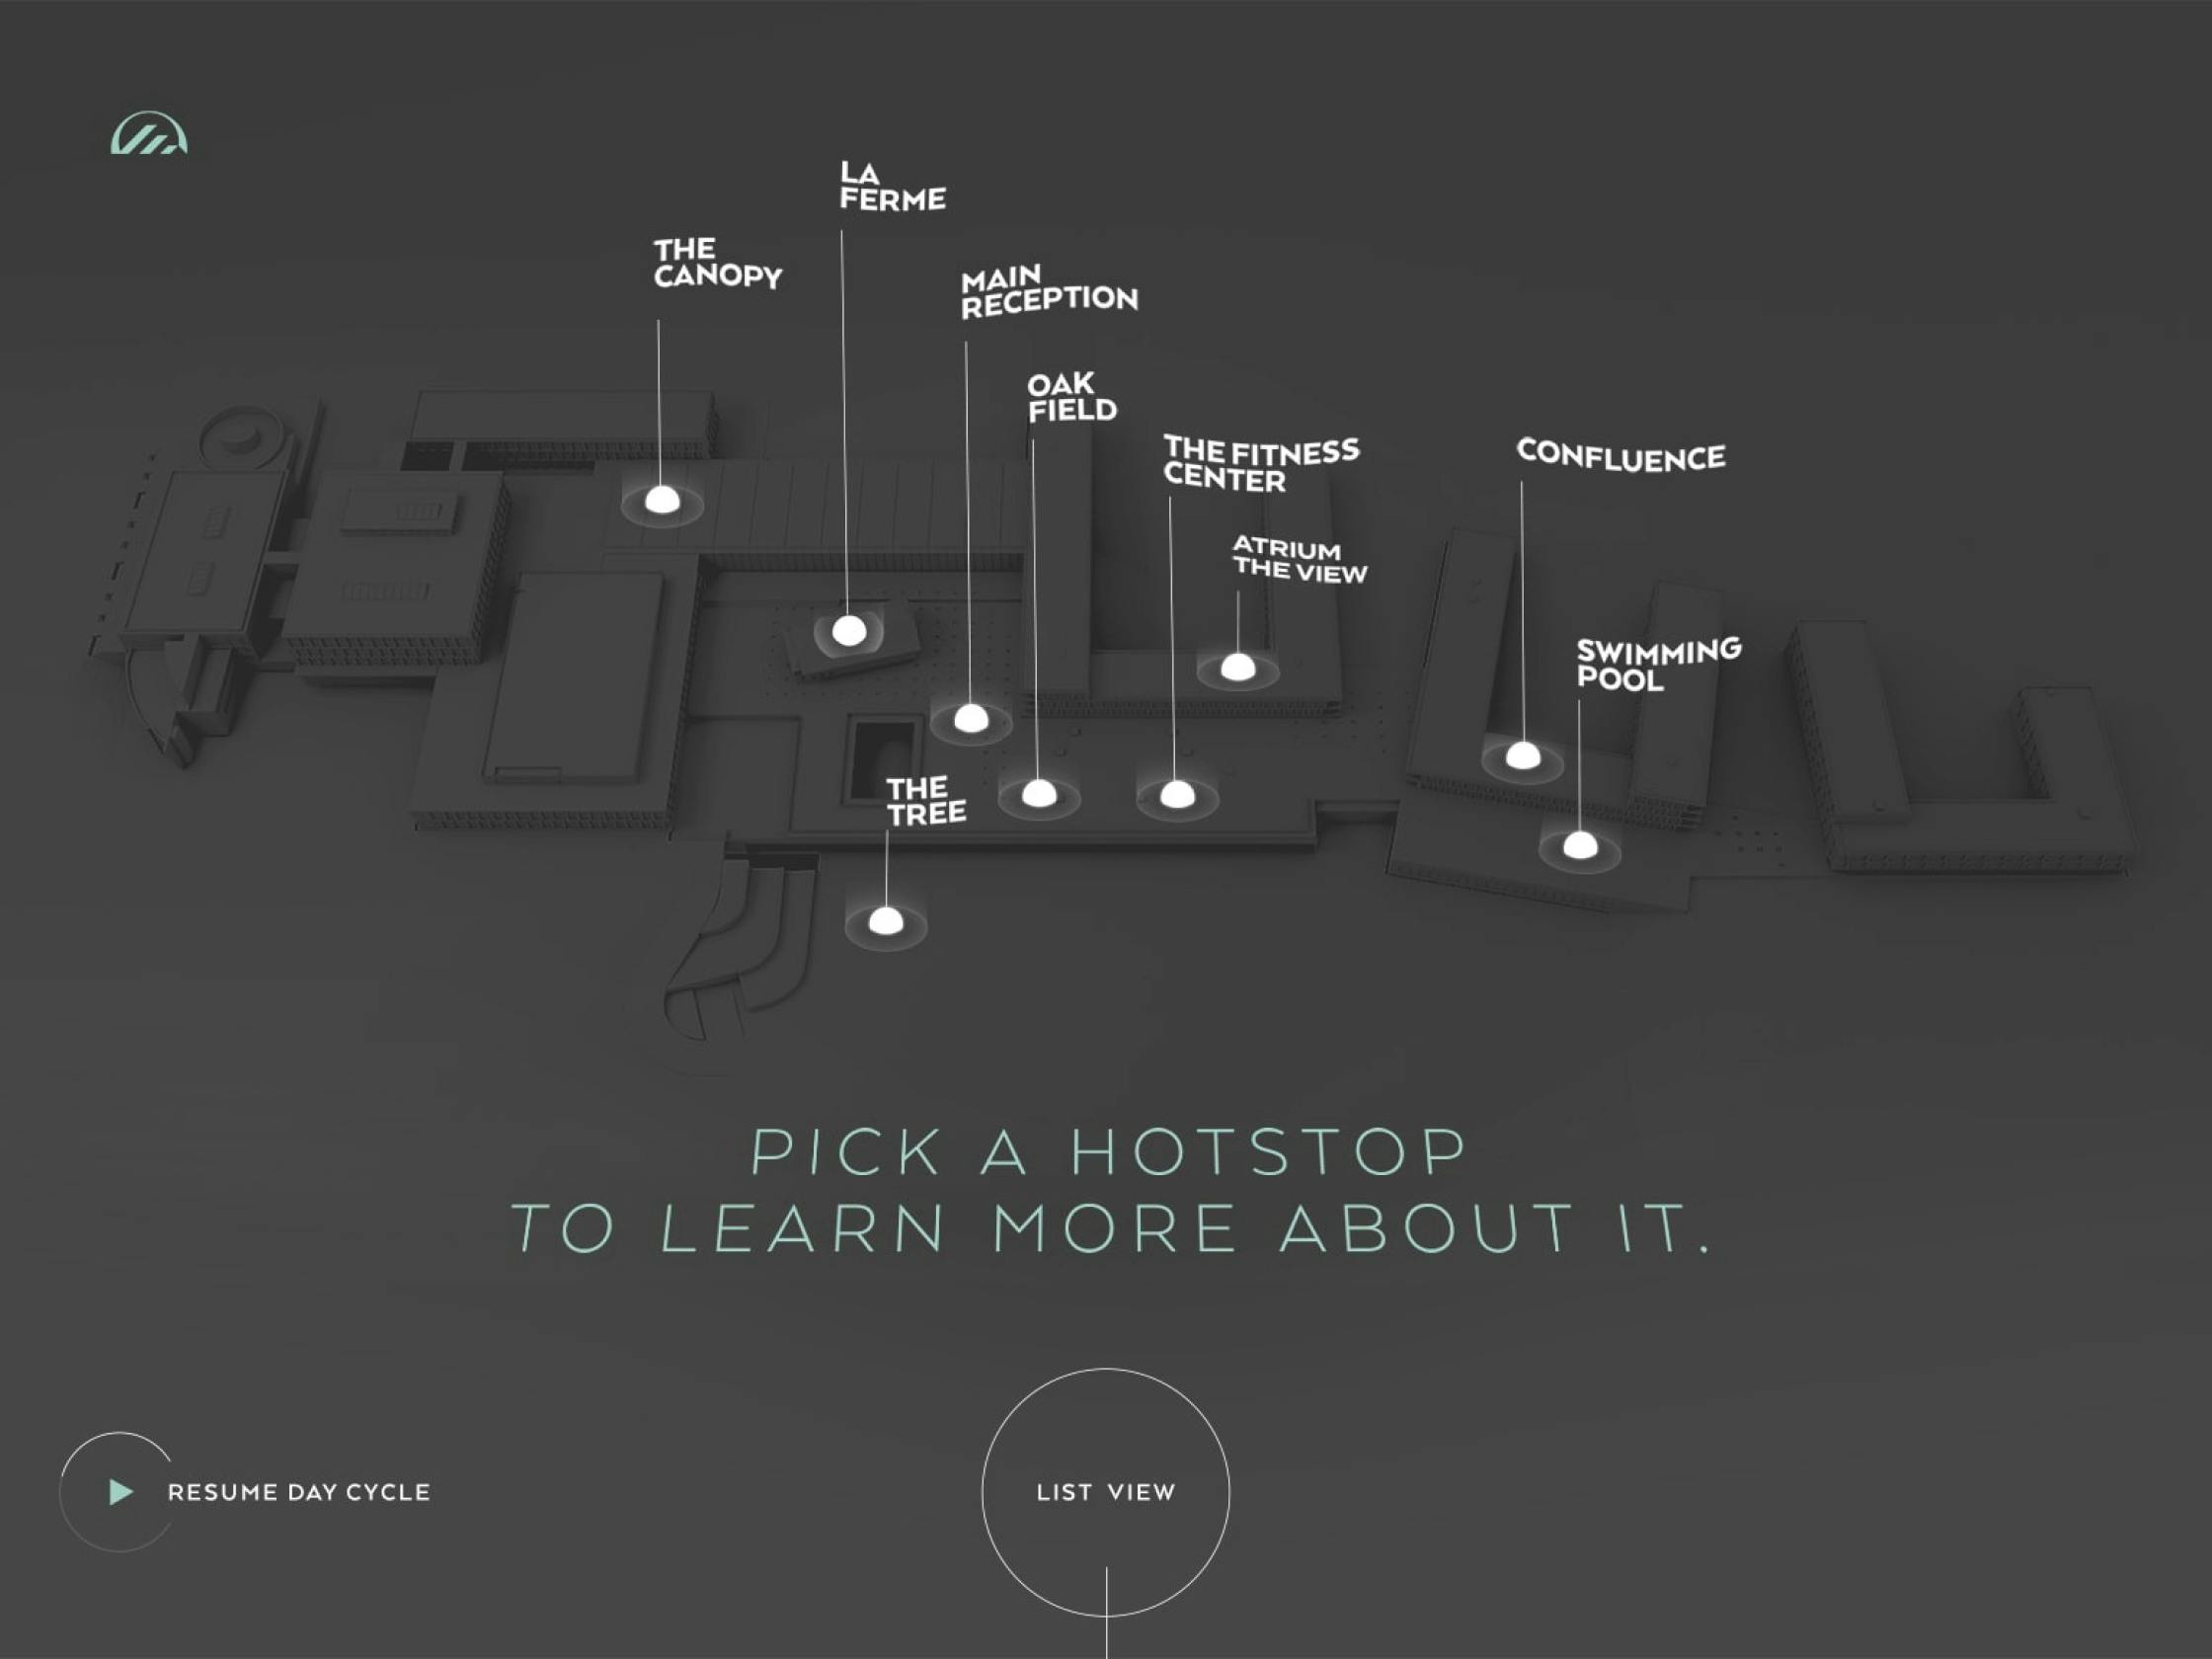 Homepage of the application "pick a hotstop to learn more about it"